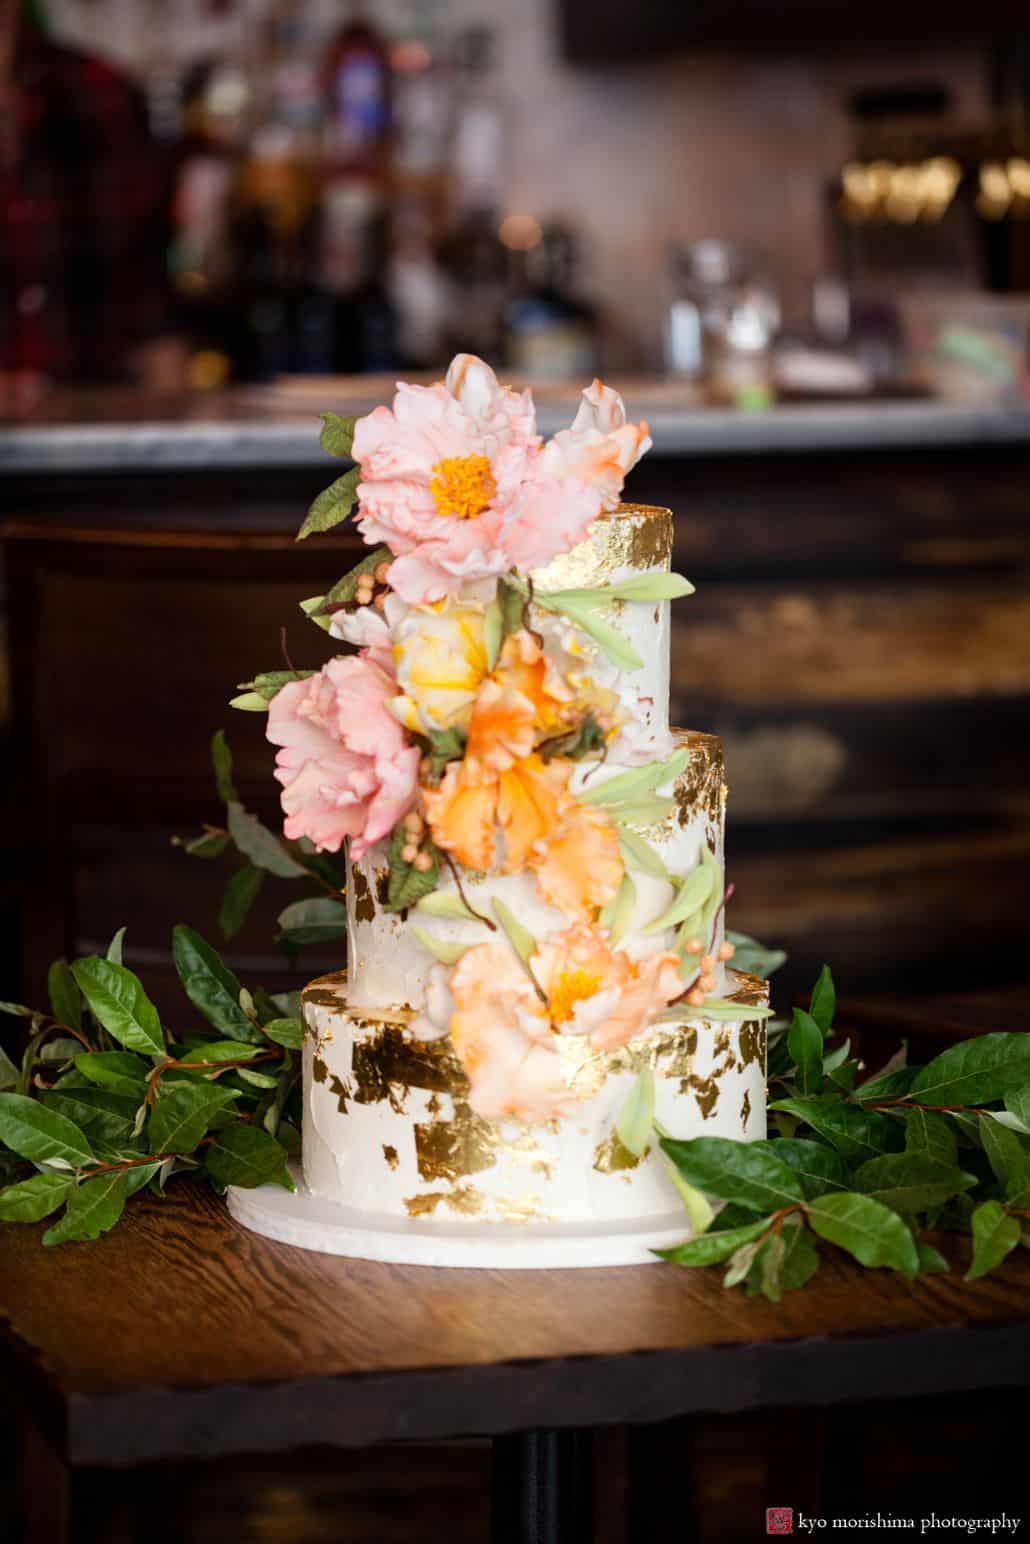 Vegan and gluten-free wedding cake by Lael Cakes in Brooklyn, NYC, photographed at Aita Trattoria